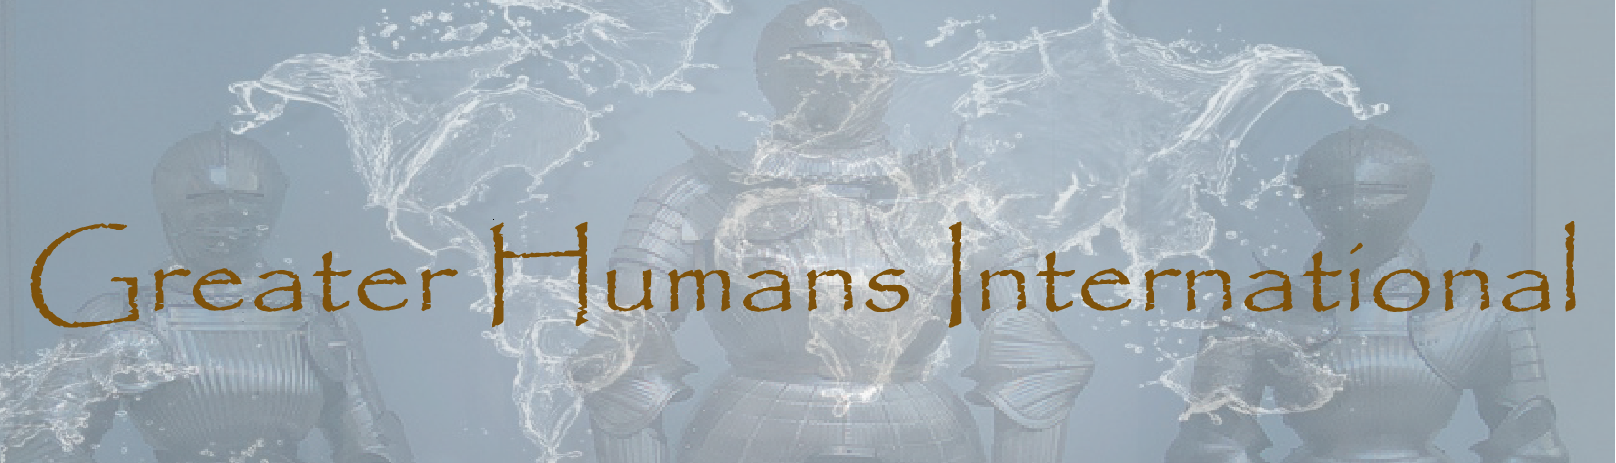 Blue banner - splashed water shaped like world map - 2 armor suits -giant in the middle - Greater Humans Stateside written